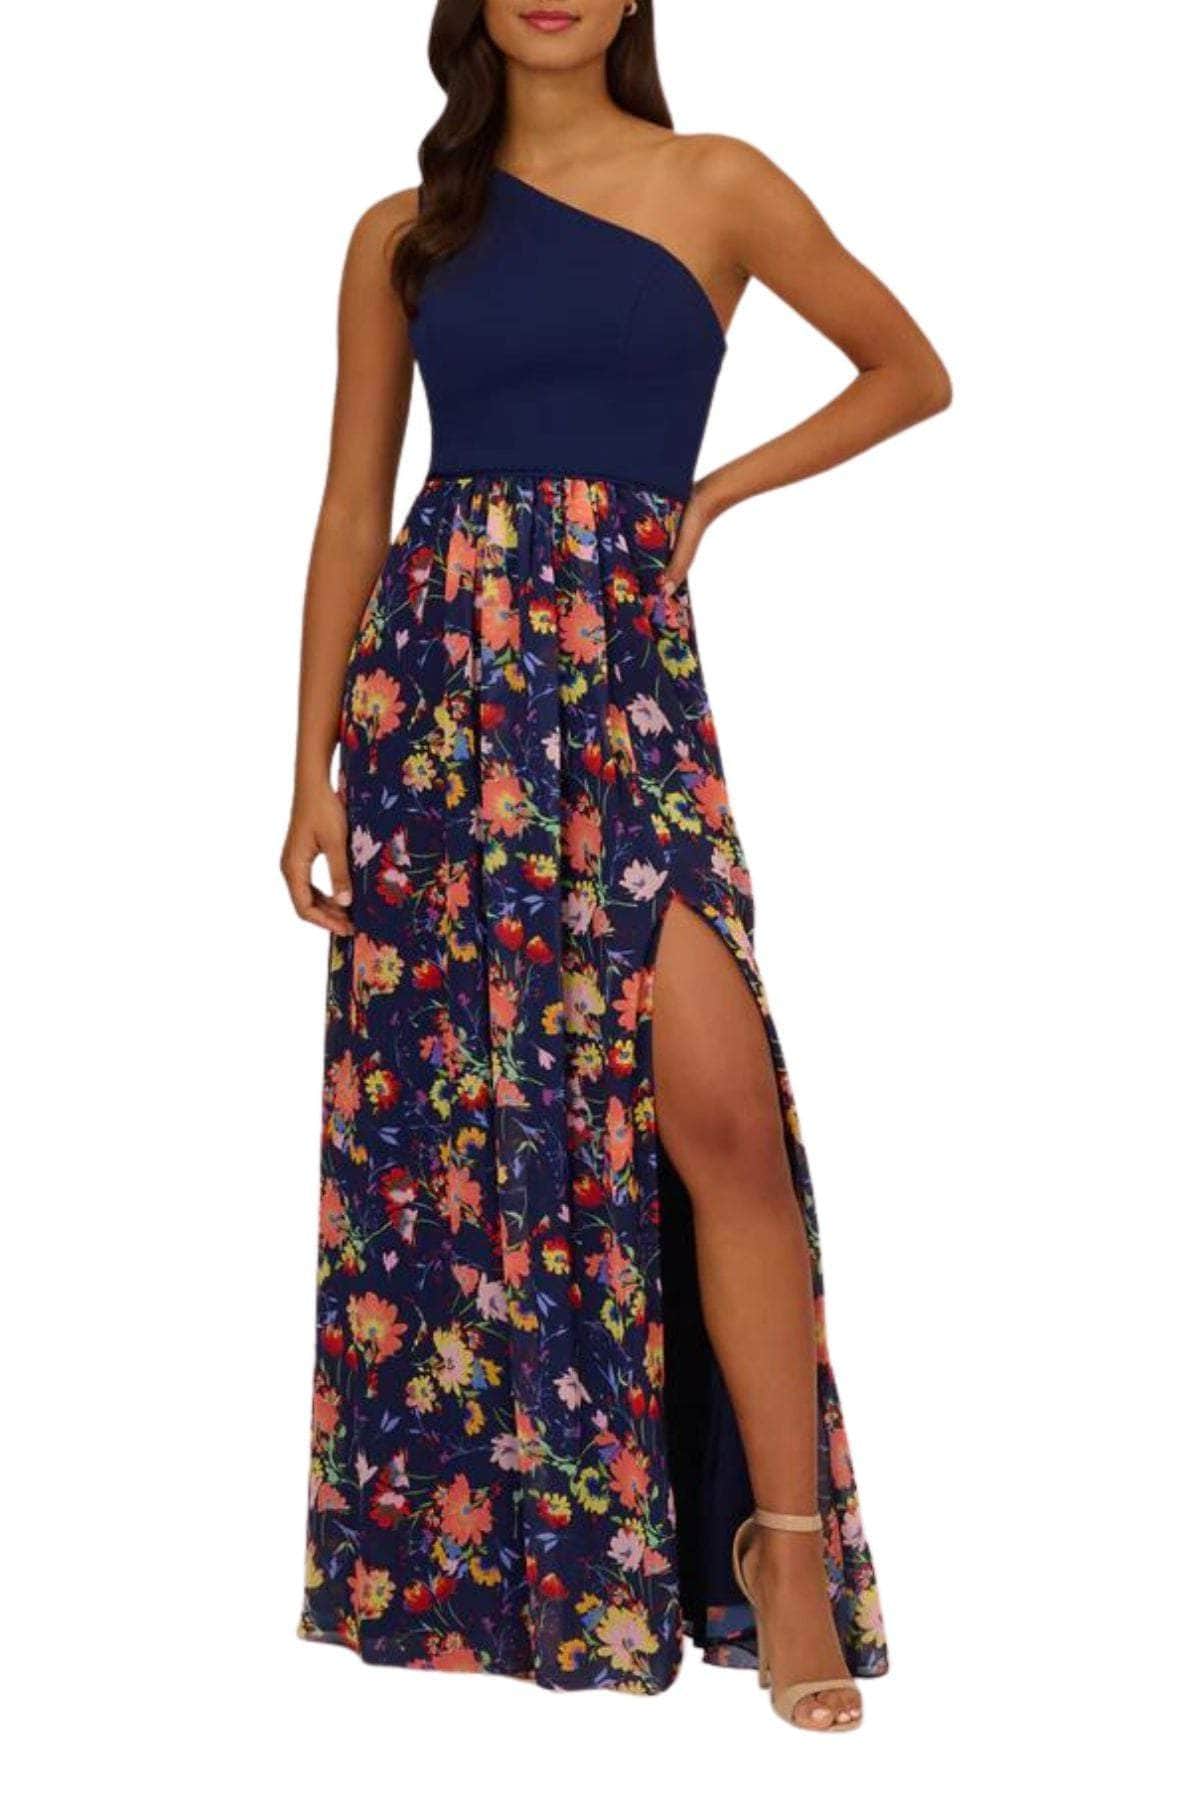 Image of Adrianna Papell AP1E210586 - One Shoulder Floral A-Line Evening Dress